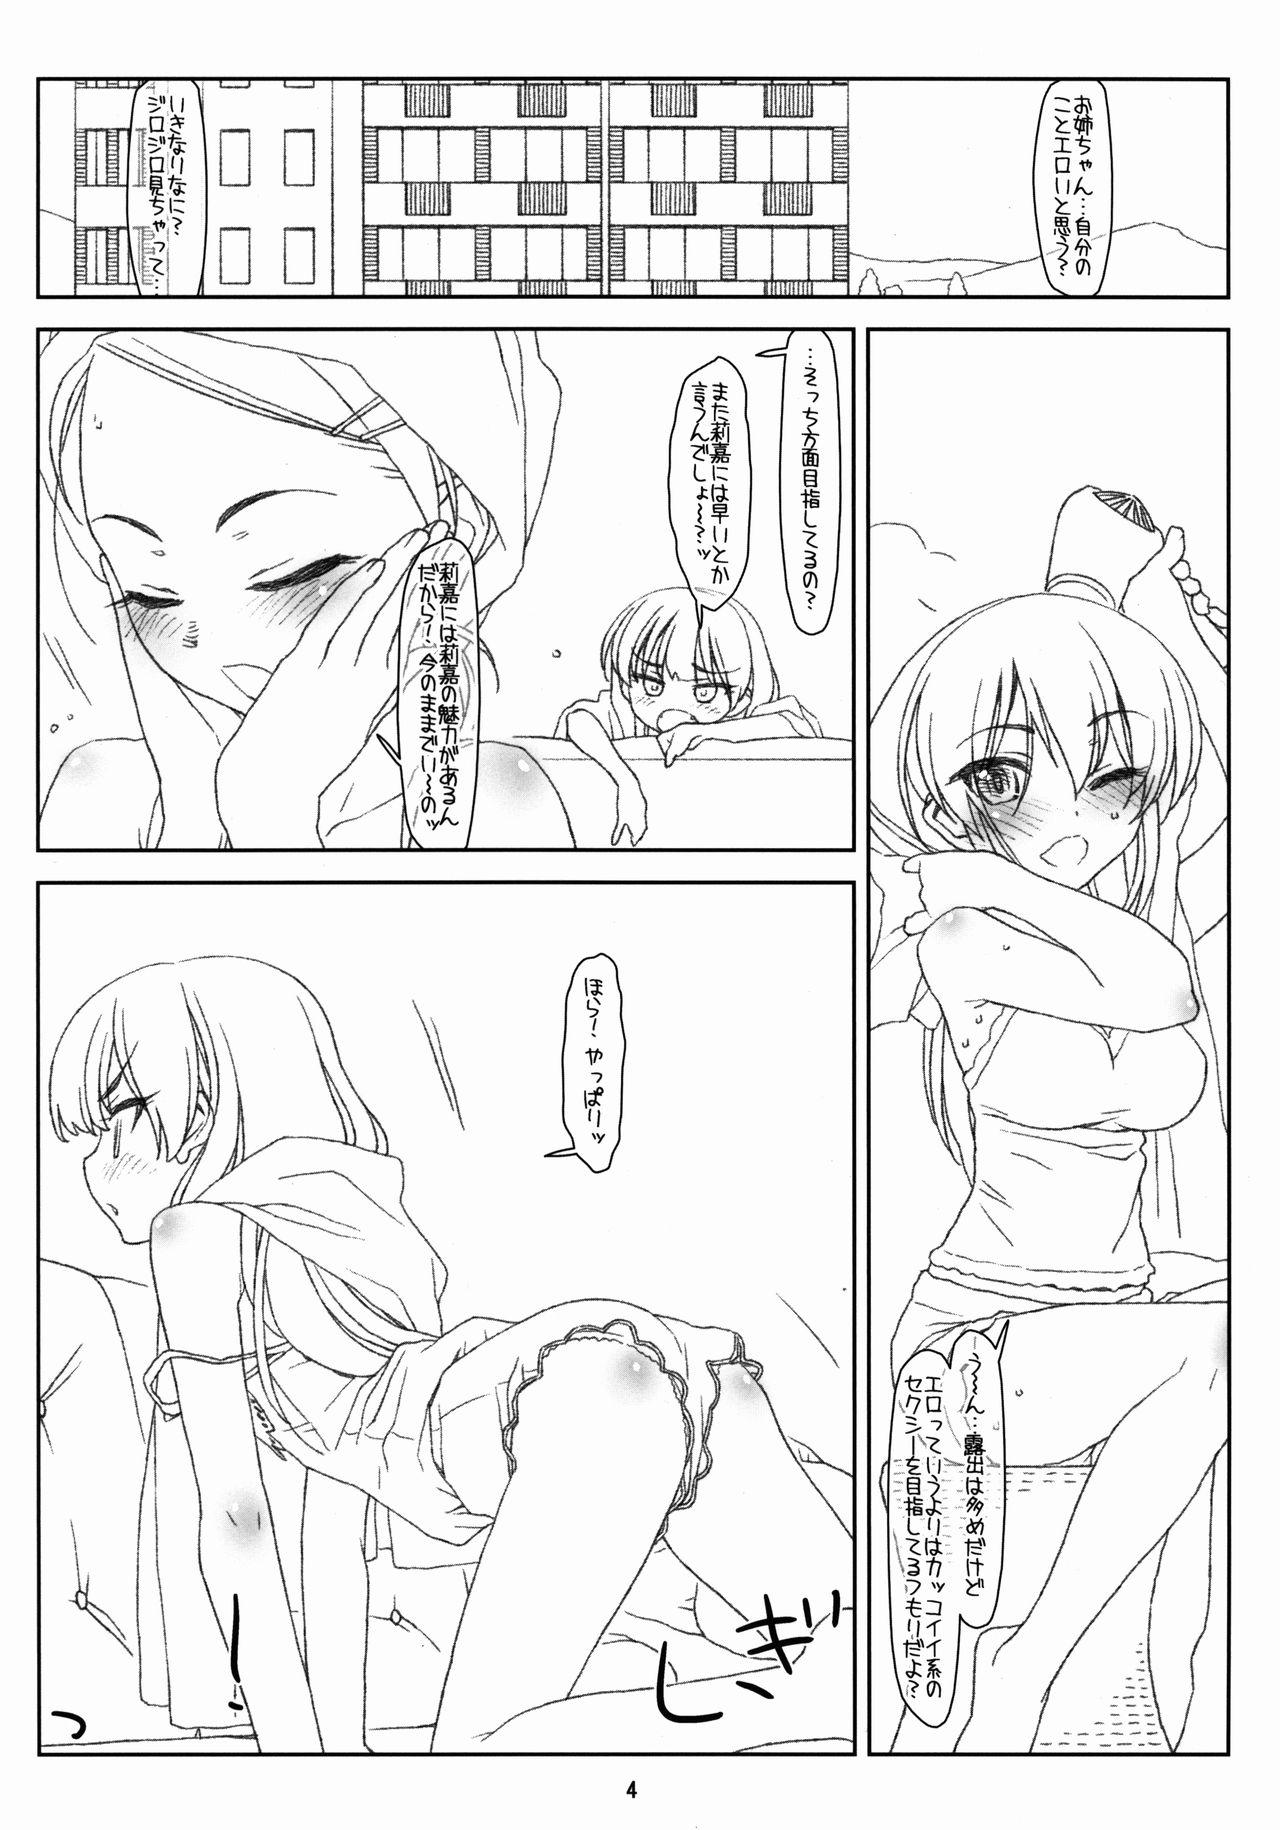 Public Nudity White Star - The idolmaster Magrinha - Page 4